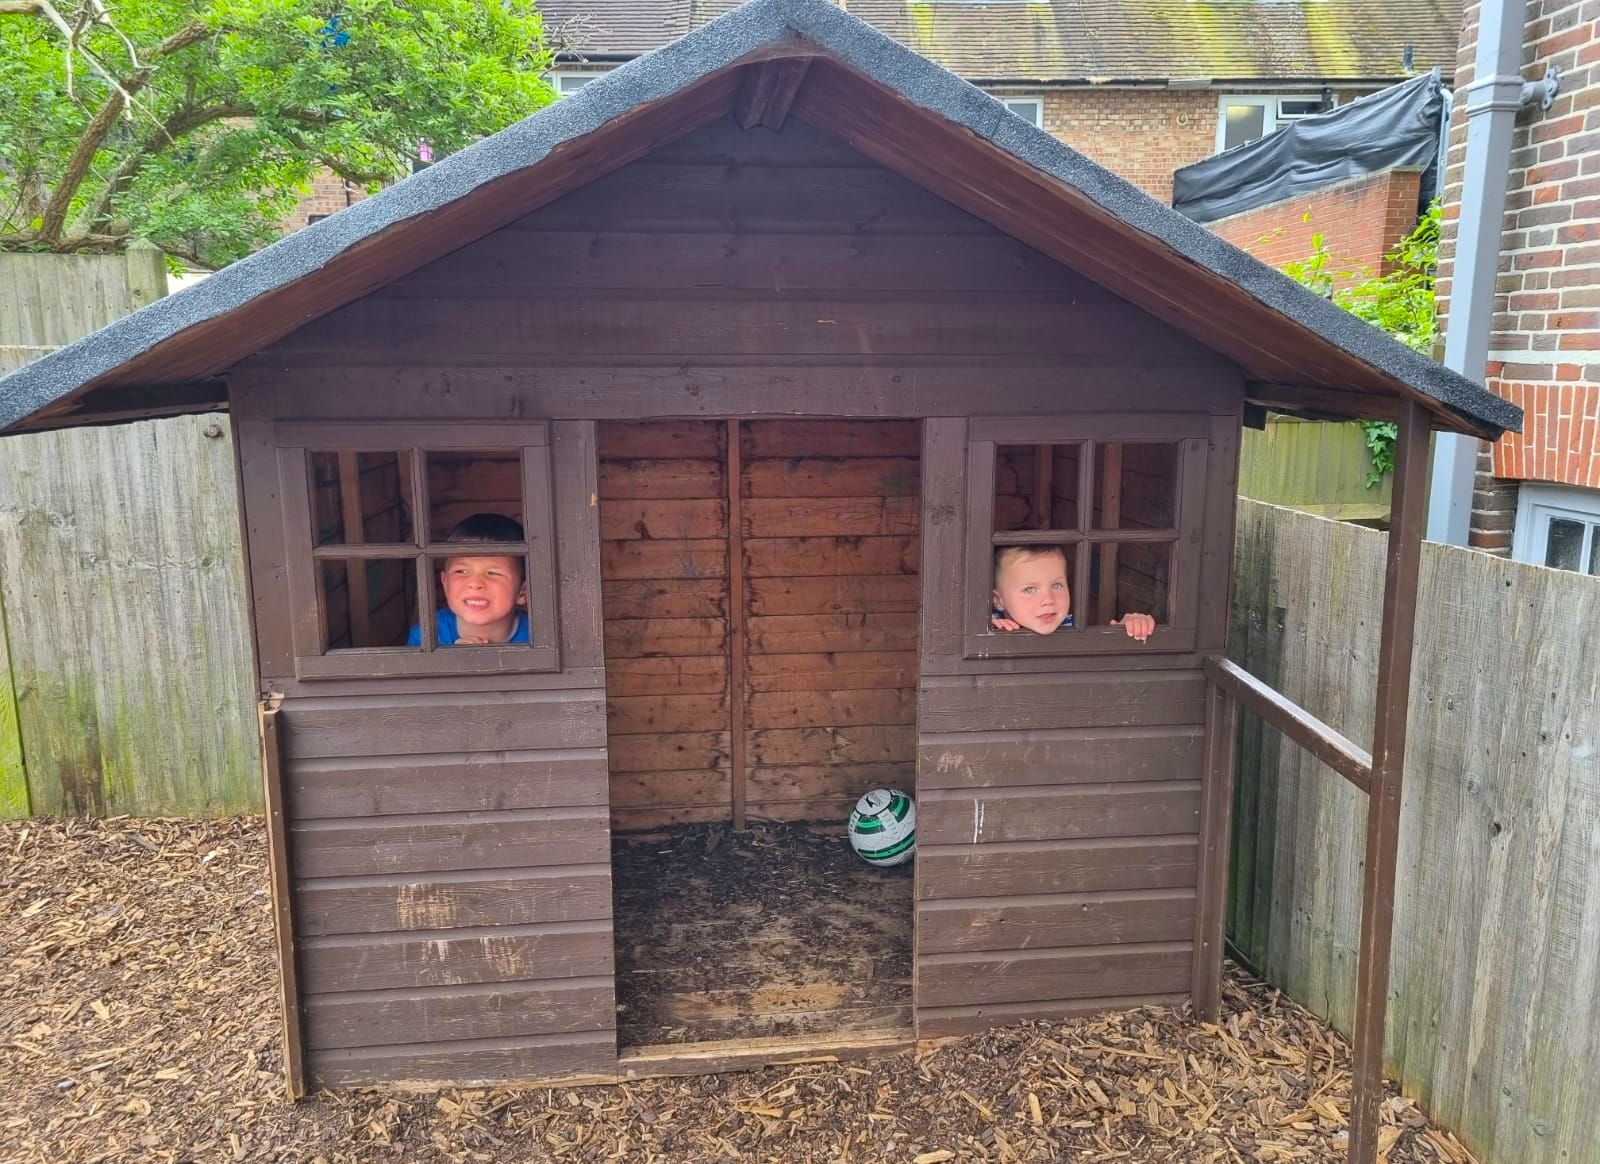 two kids looking through the window of the small wooden playhouse